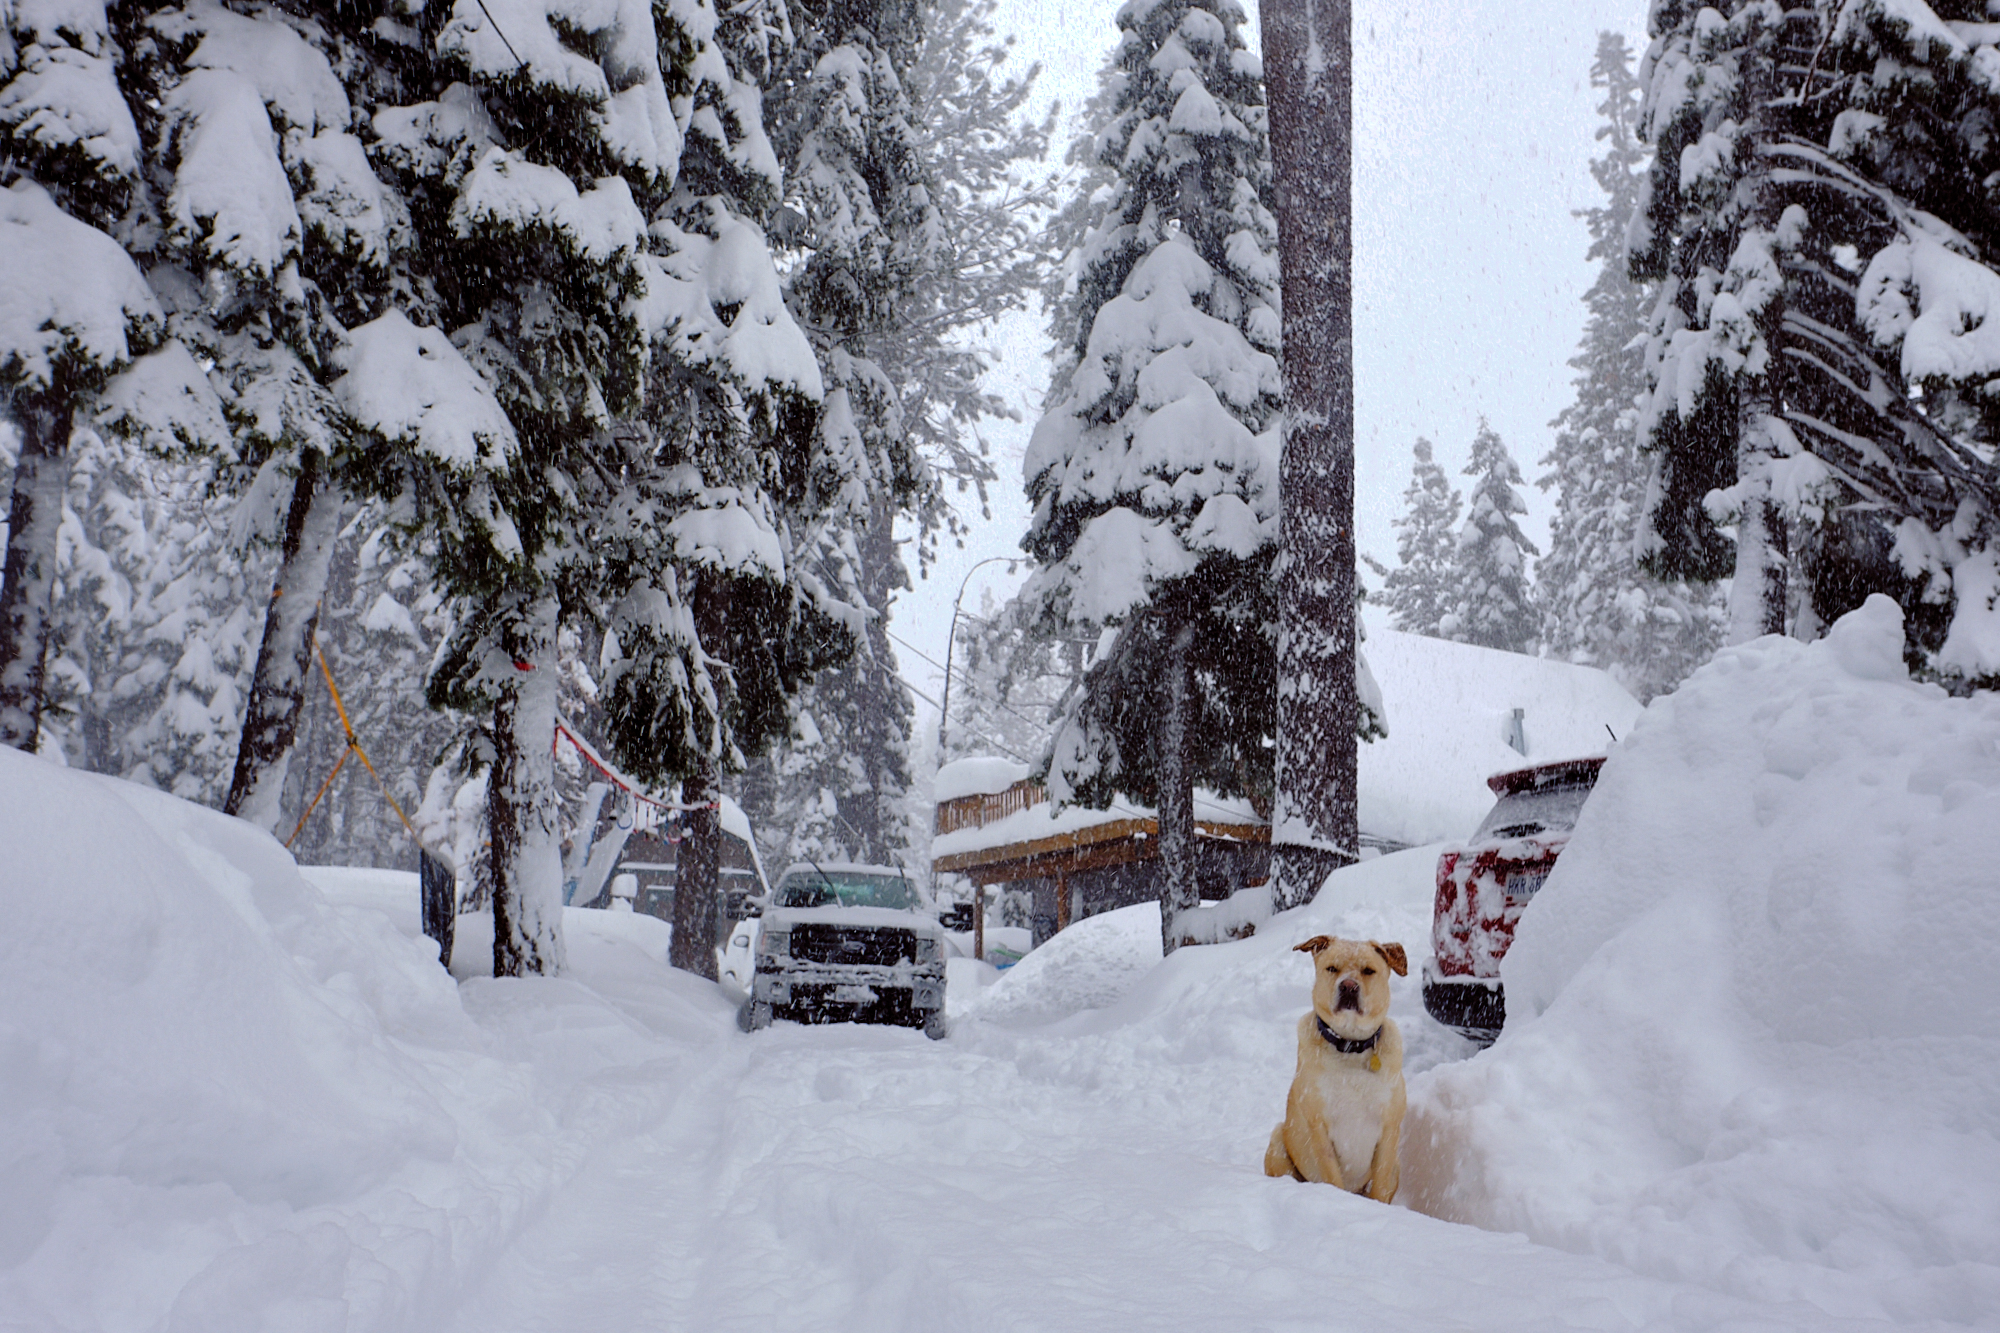  Buddy guards the Hering household in the calm before a blizzard. The last offical blizzard was in 2008. | Tahoe City, CA 2/4/19 